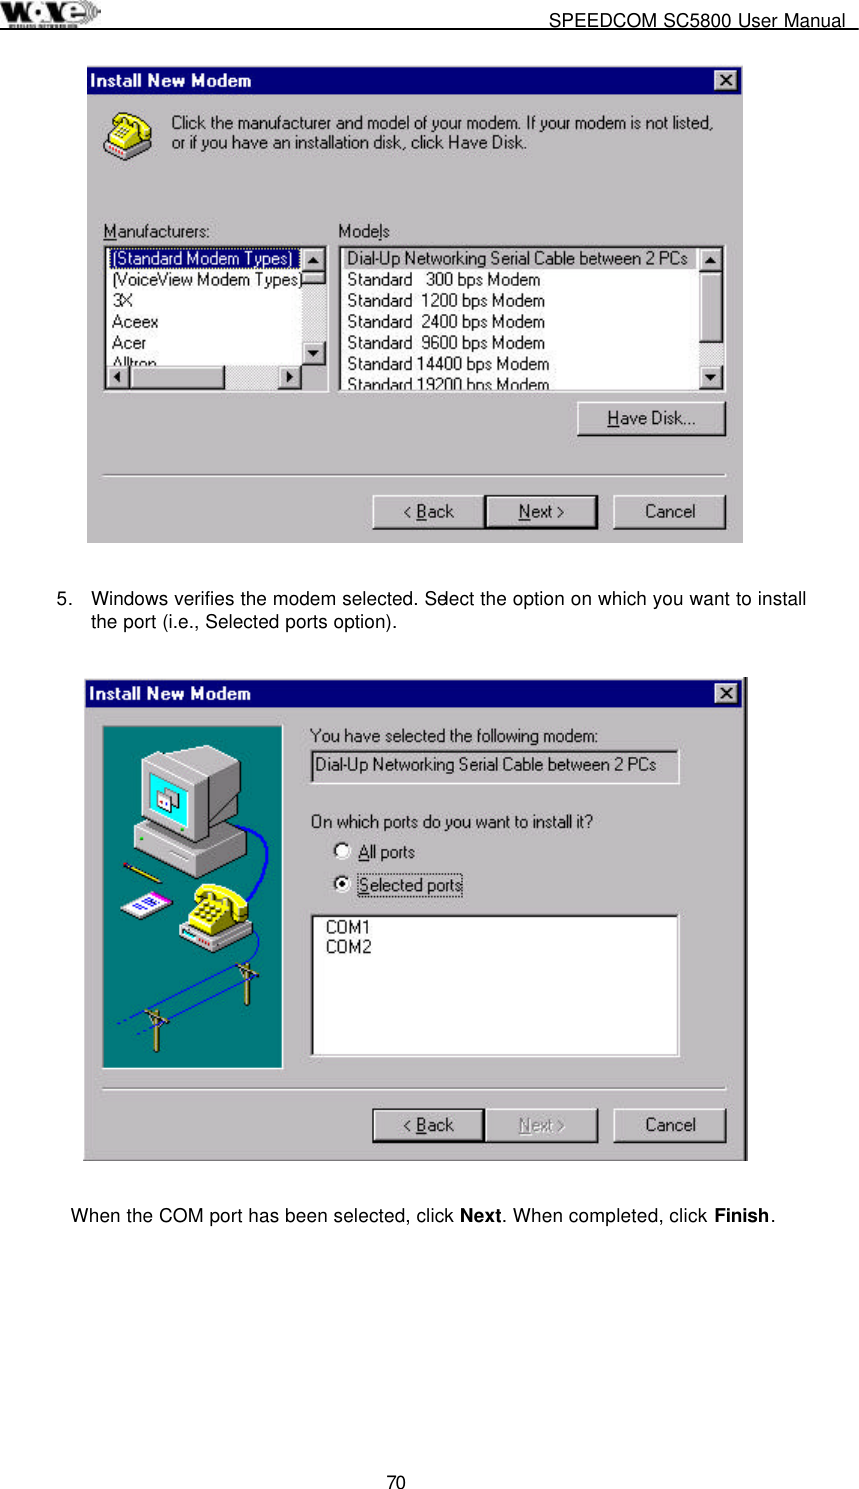     SPEEDCOM SC5800 User Manual  70   5.  Windows verifies the modem selected. Select the option on which you want to install the port (i.e., Selected ports option).    When the COM port has been selected, click Next. When completed, click Finish.  